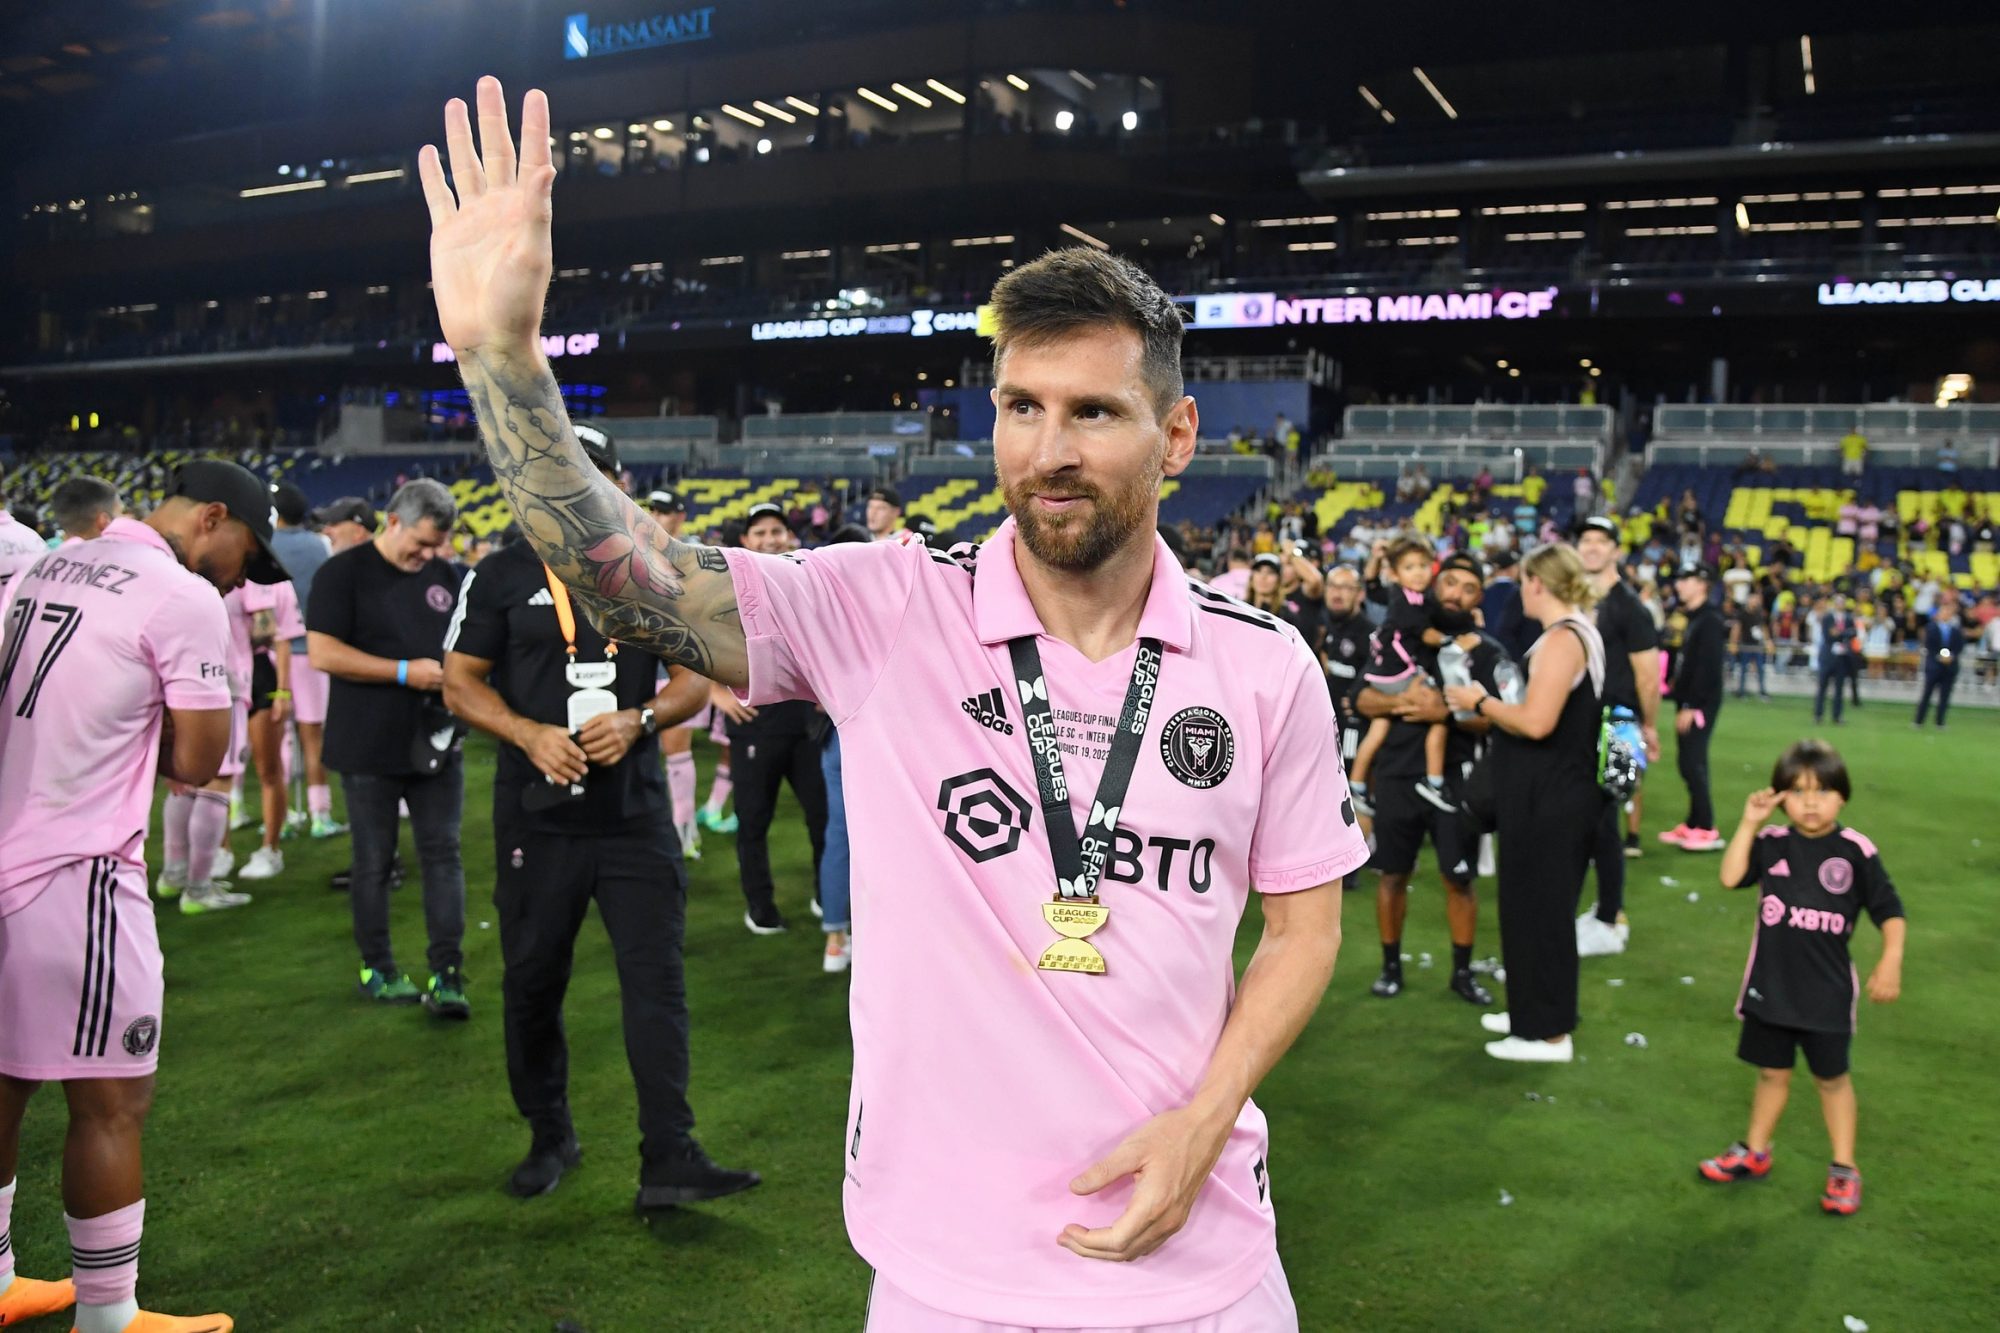 Leagues Cup final result, score, highlights as Lionel Messi guides